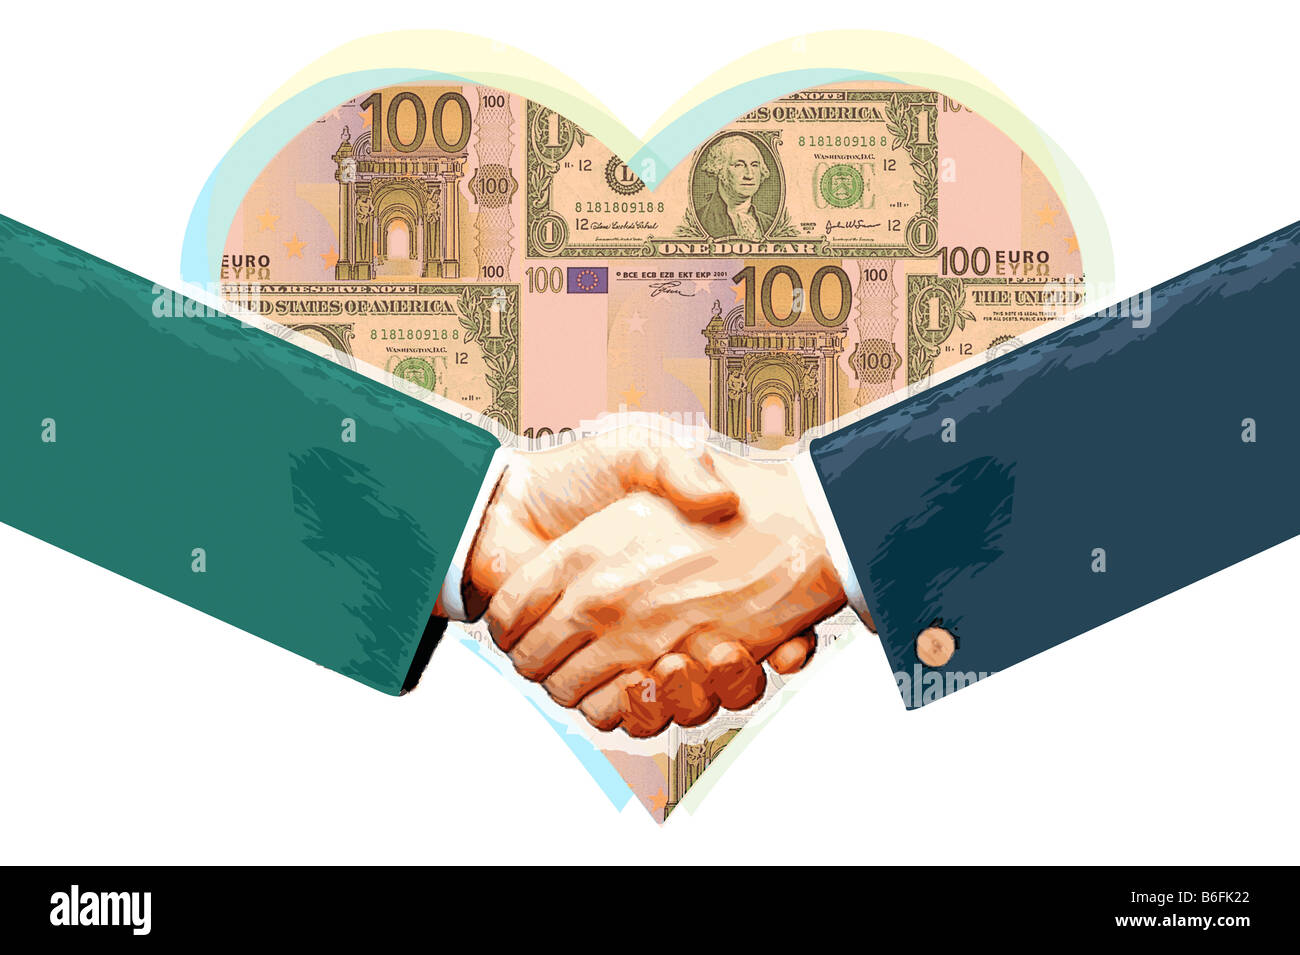 Illustration, shaking hands in front of heart-shaped banknotes, finance rules Stock Photo